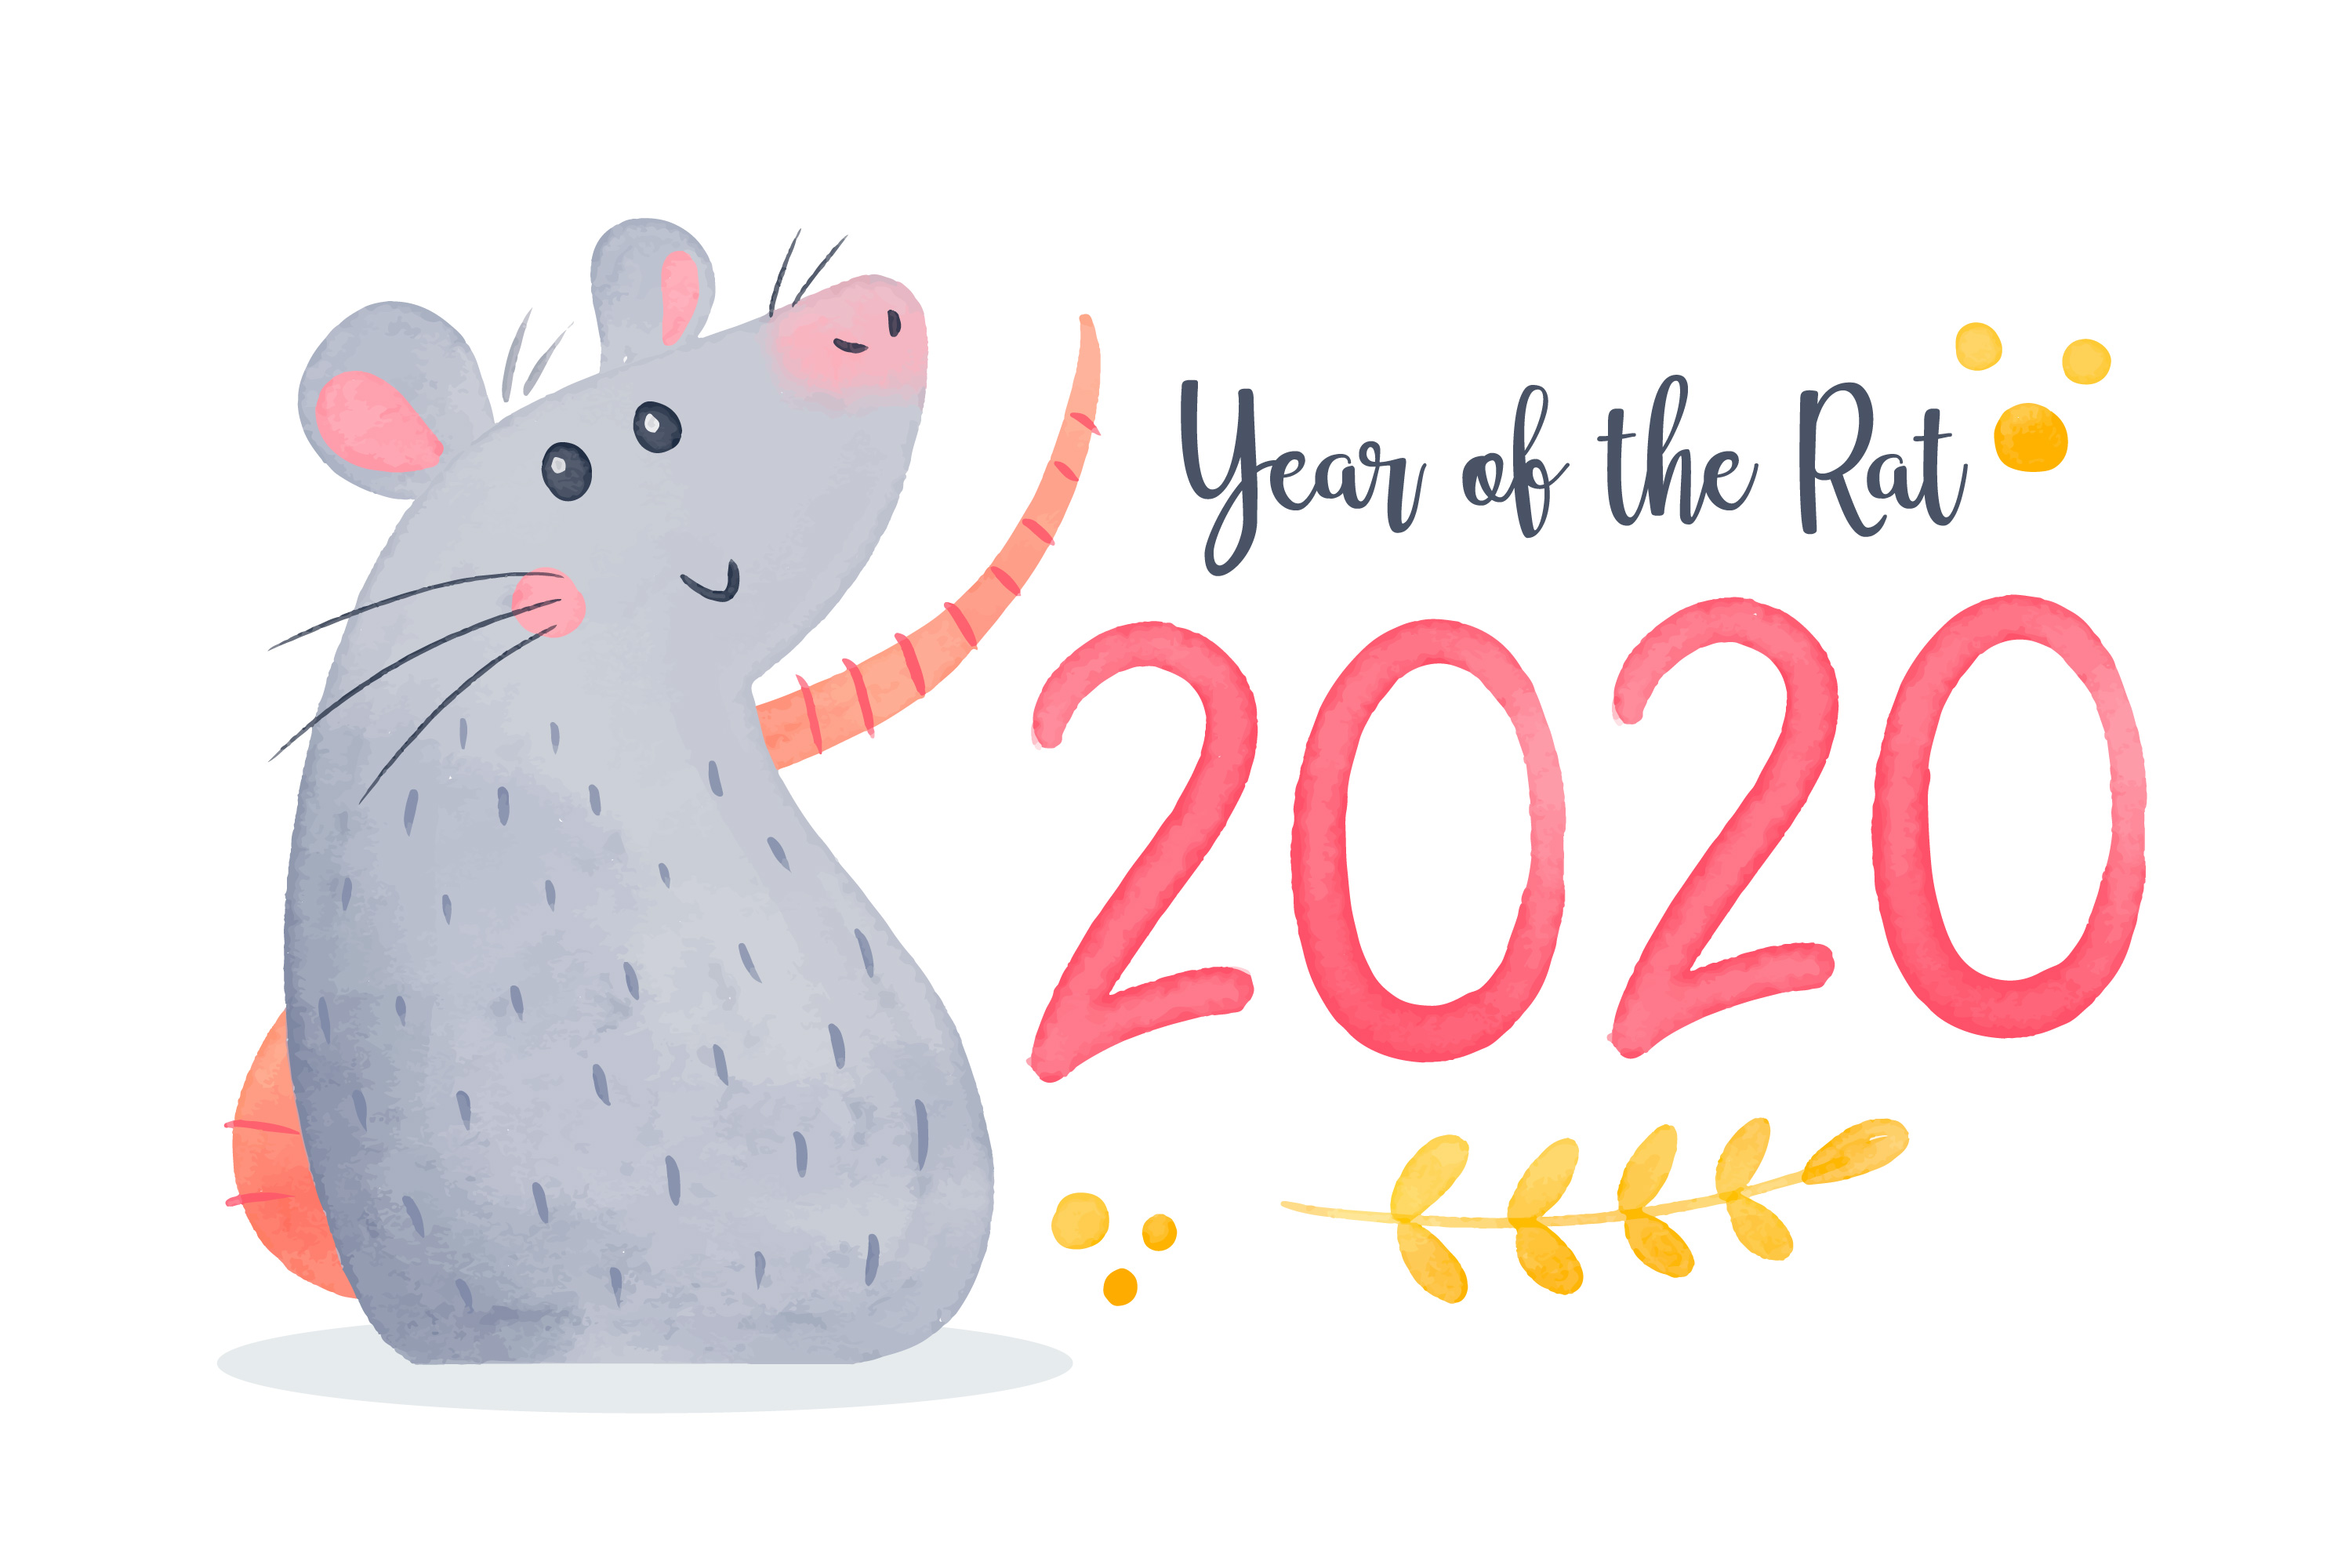 Chinese New Year 2020 - Year of the rat